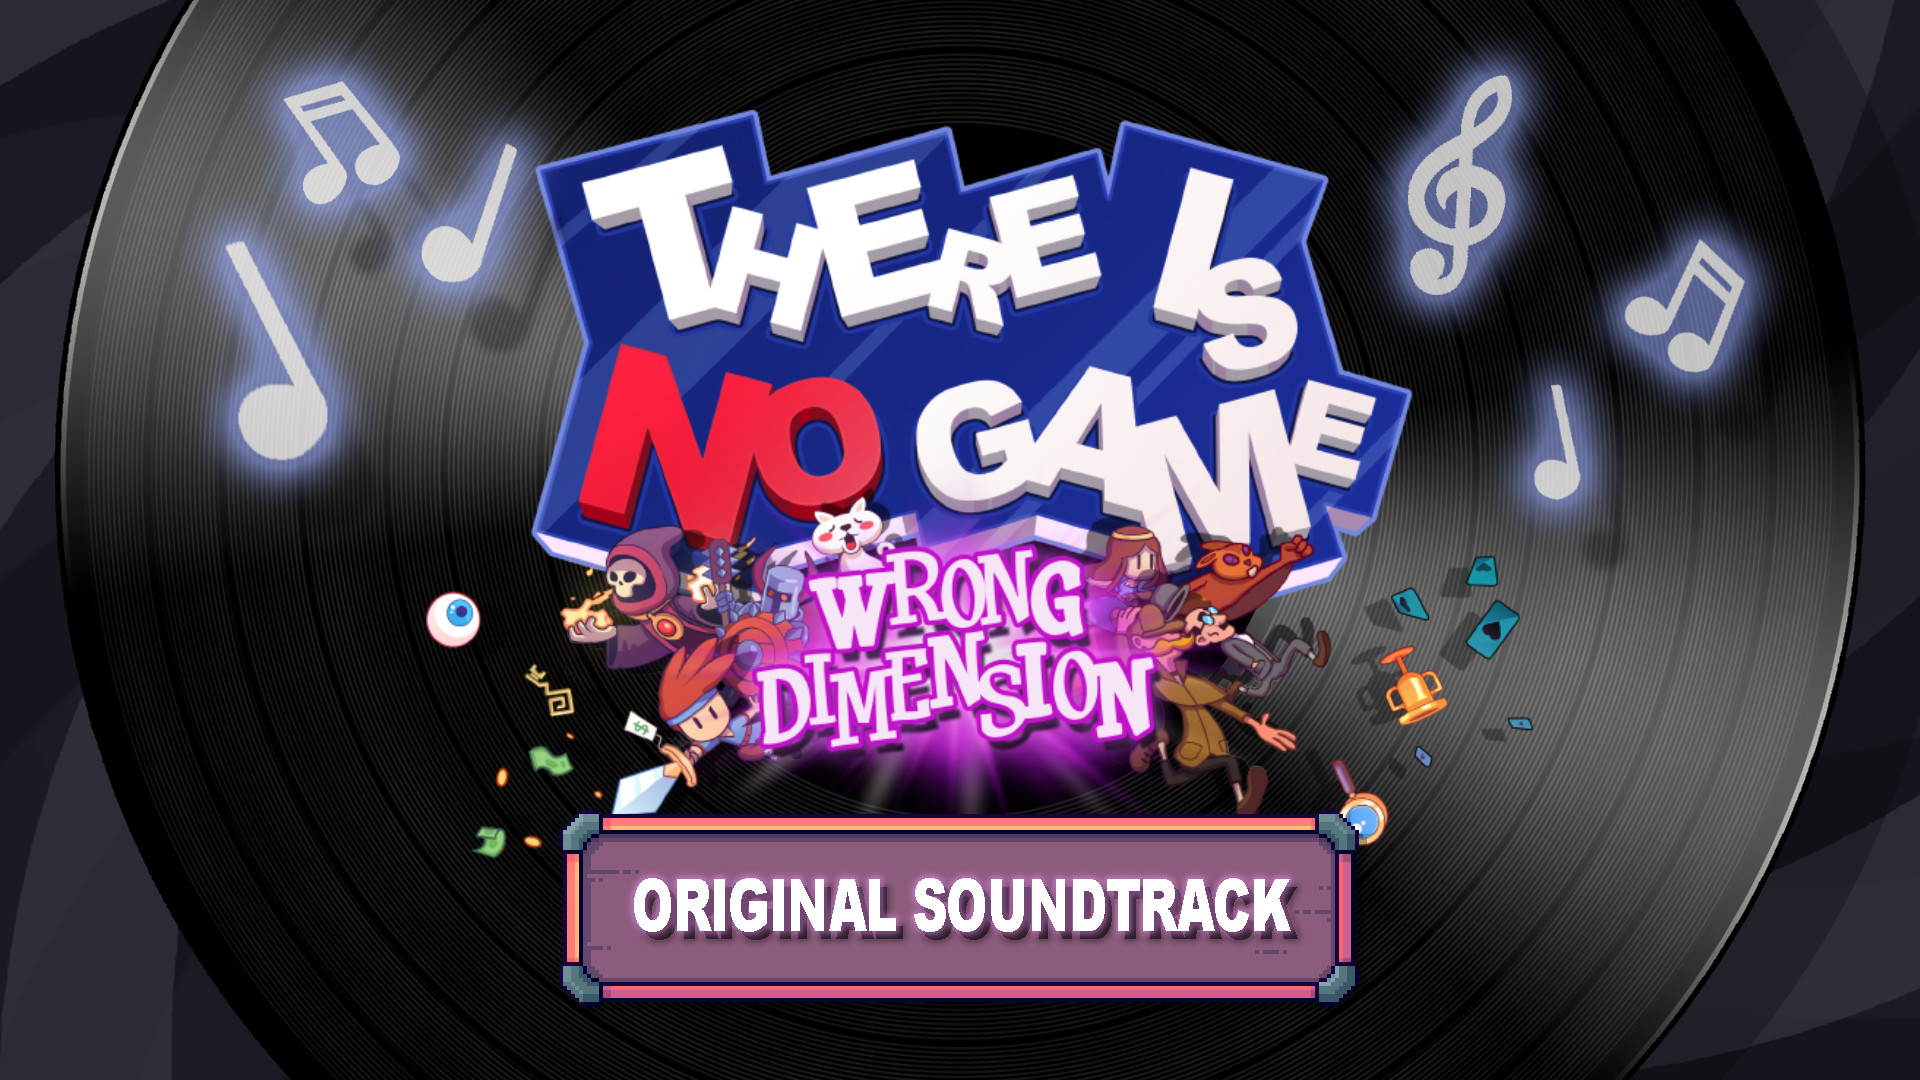 There Is No Game: Wrong Dimension Soundtrack Featured Screenshot #1